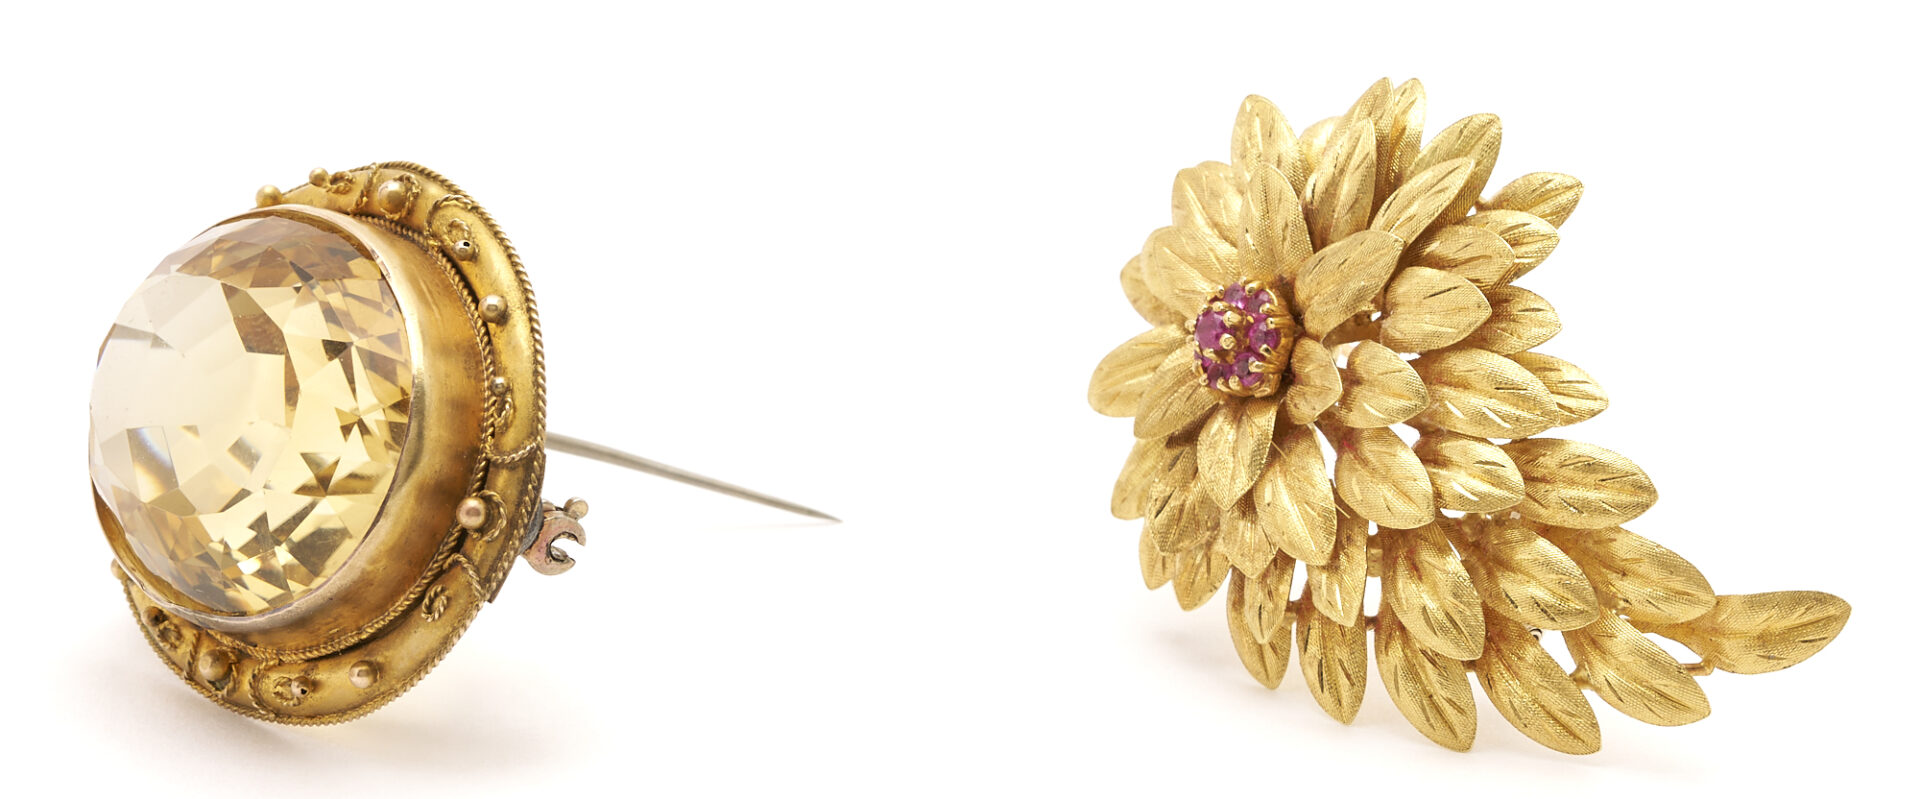 Lot 275: 2 Gold & Gemstone Brooches